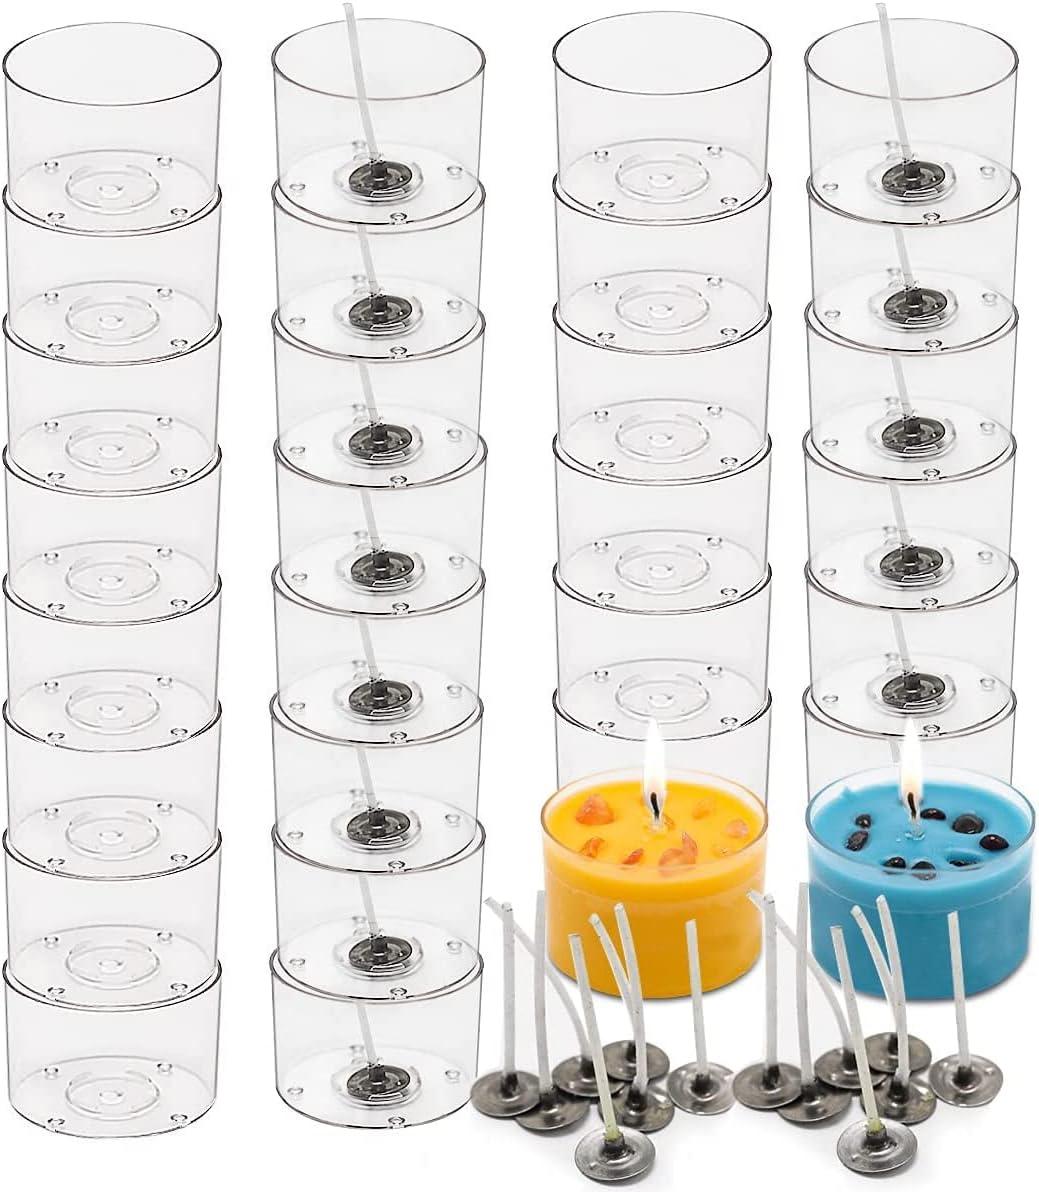 PEILIN 100 pcs Plastic Clear Tealight Cups Holders Candle Wax Tins Jars  Cases with 100pcs 40